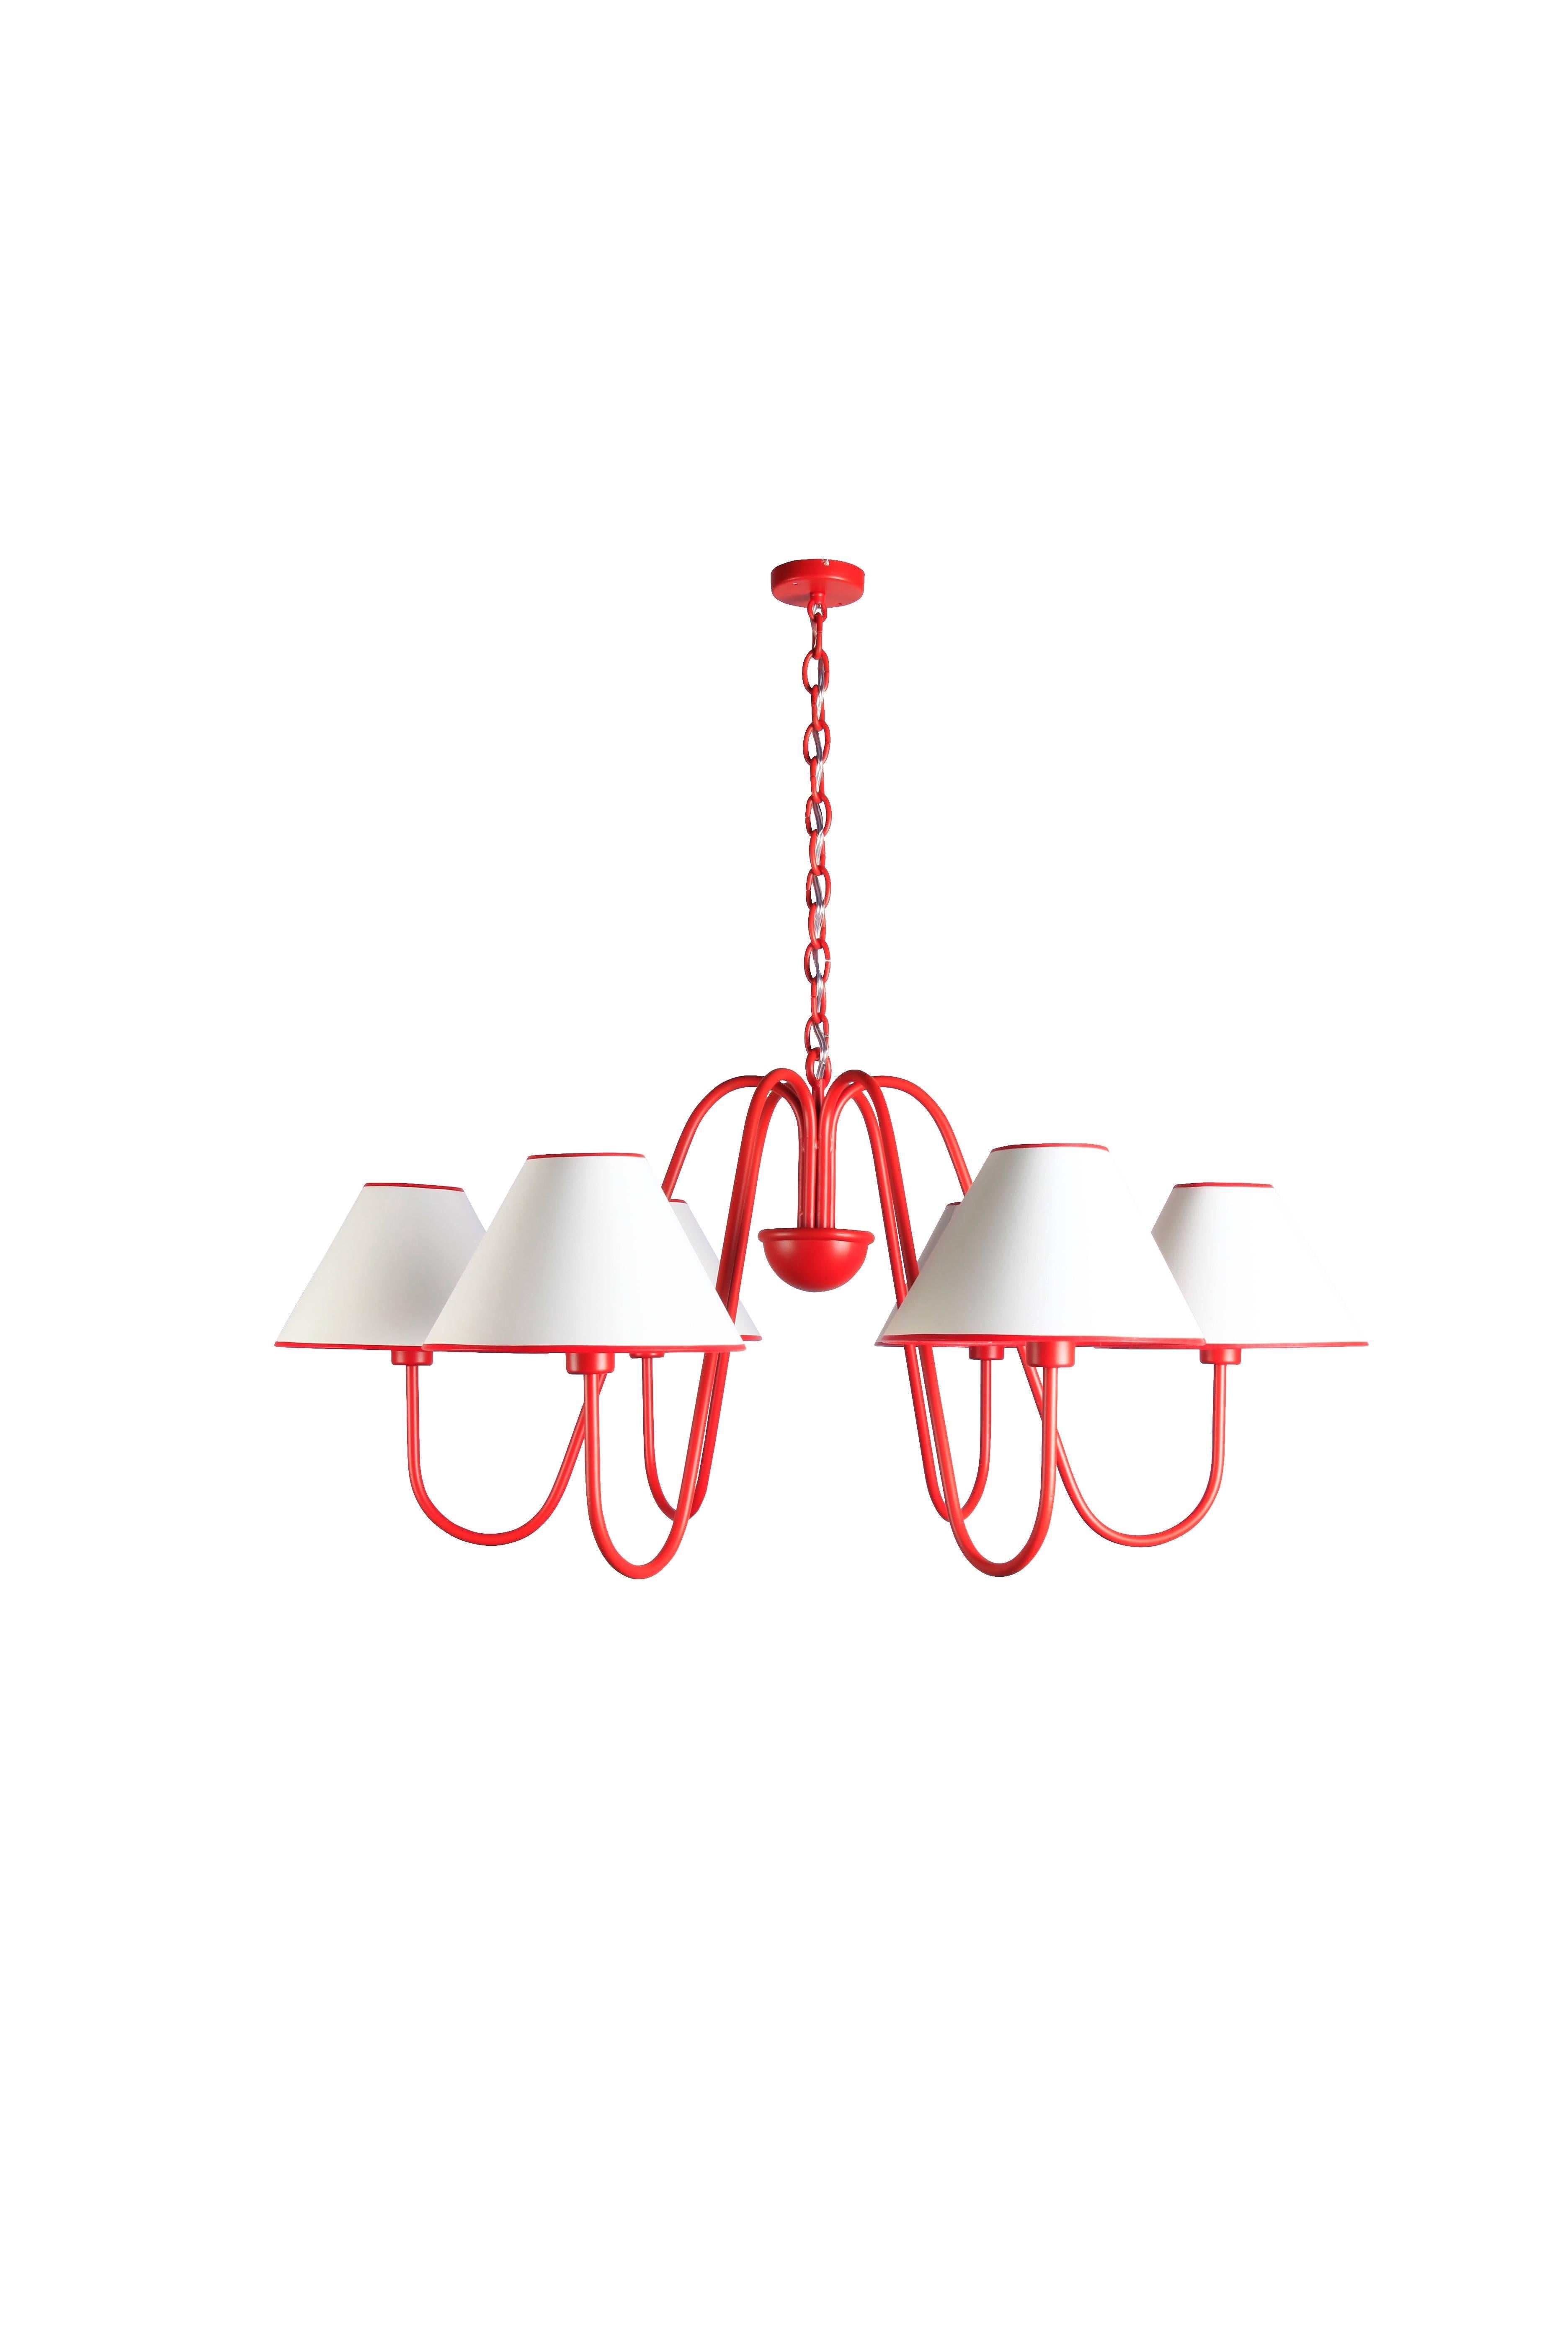 Large 'Bouquet' Six-Arm Chandelier in the Style of Jean Royère (Moderne)